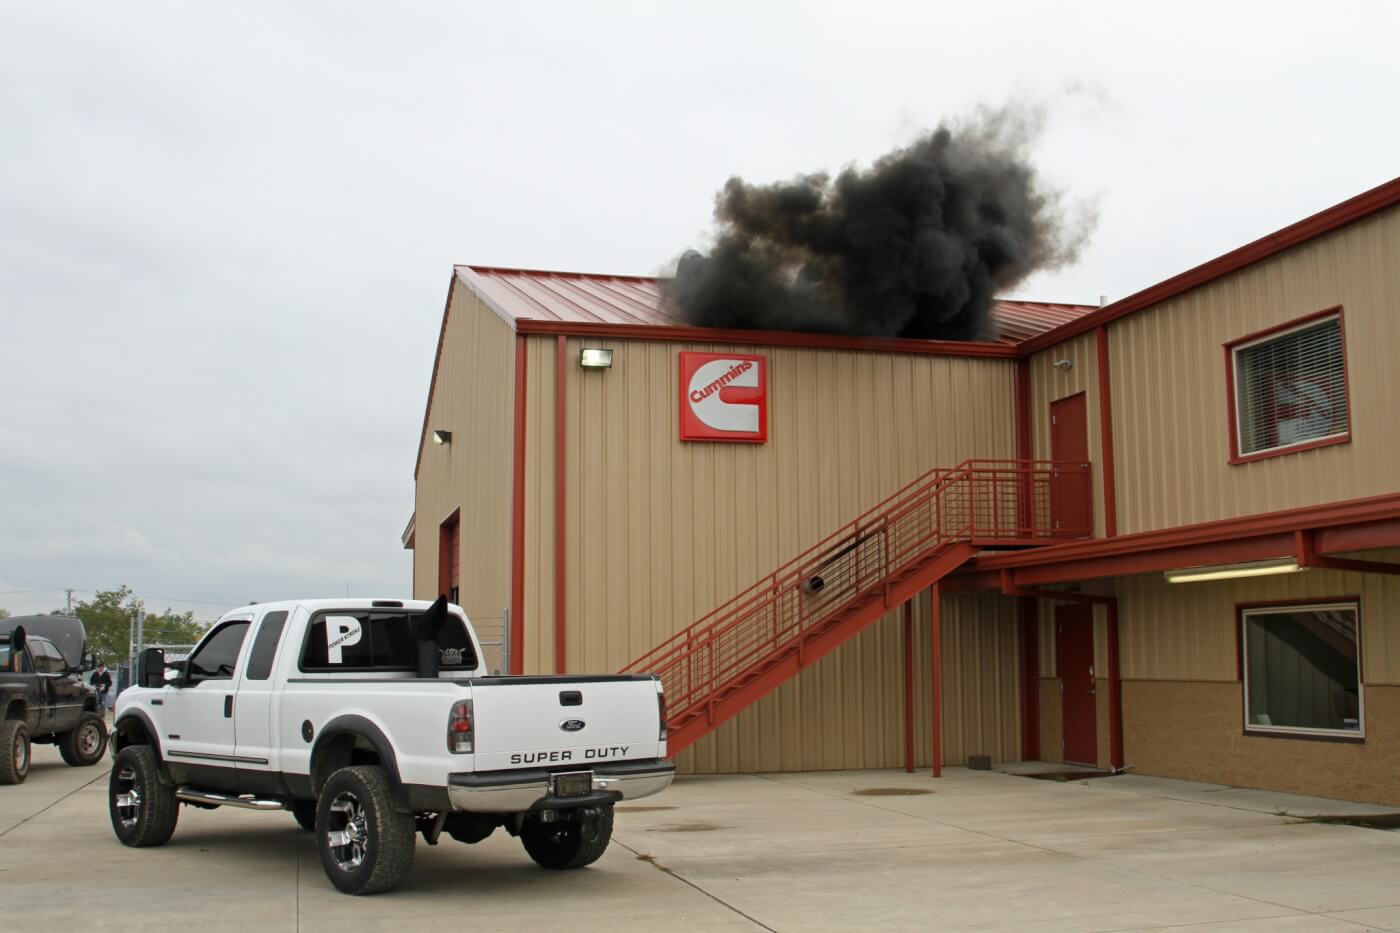 It’s an odd sight to catch an industrial building “rolling coal,” but the dyno cell at Thoroughbred is equipped with exhaust outlets to accommodate virtually any diesel truck exhaust configuration.